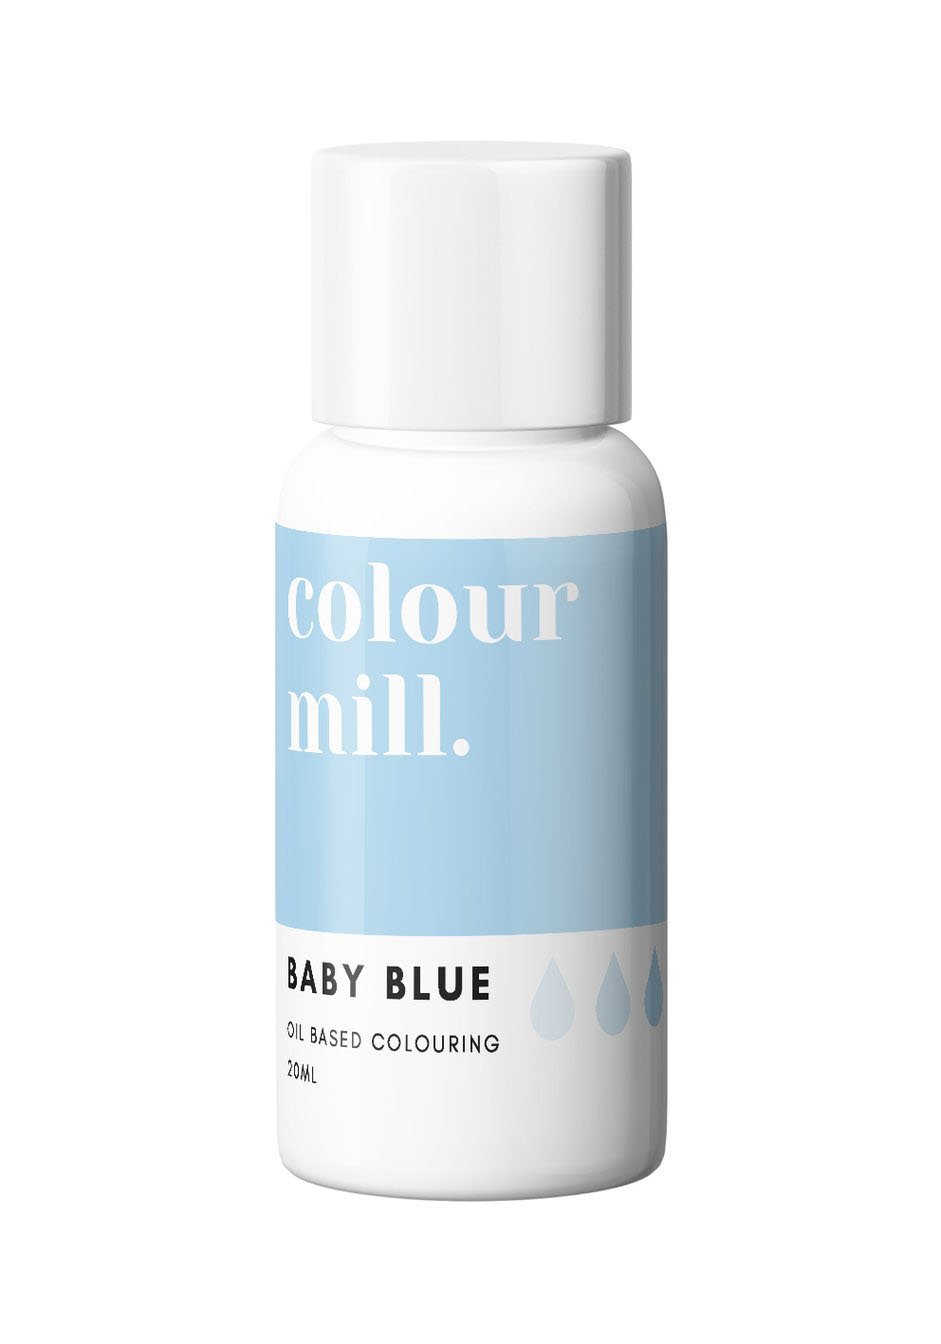 Colour Mill Baby Blue Colouring 20ml